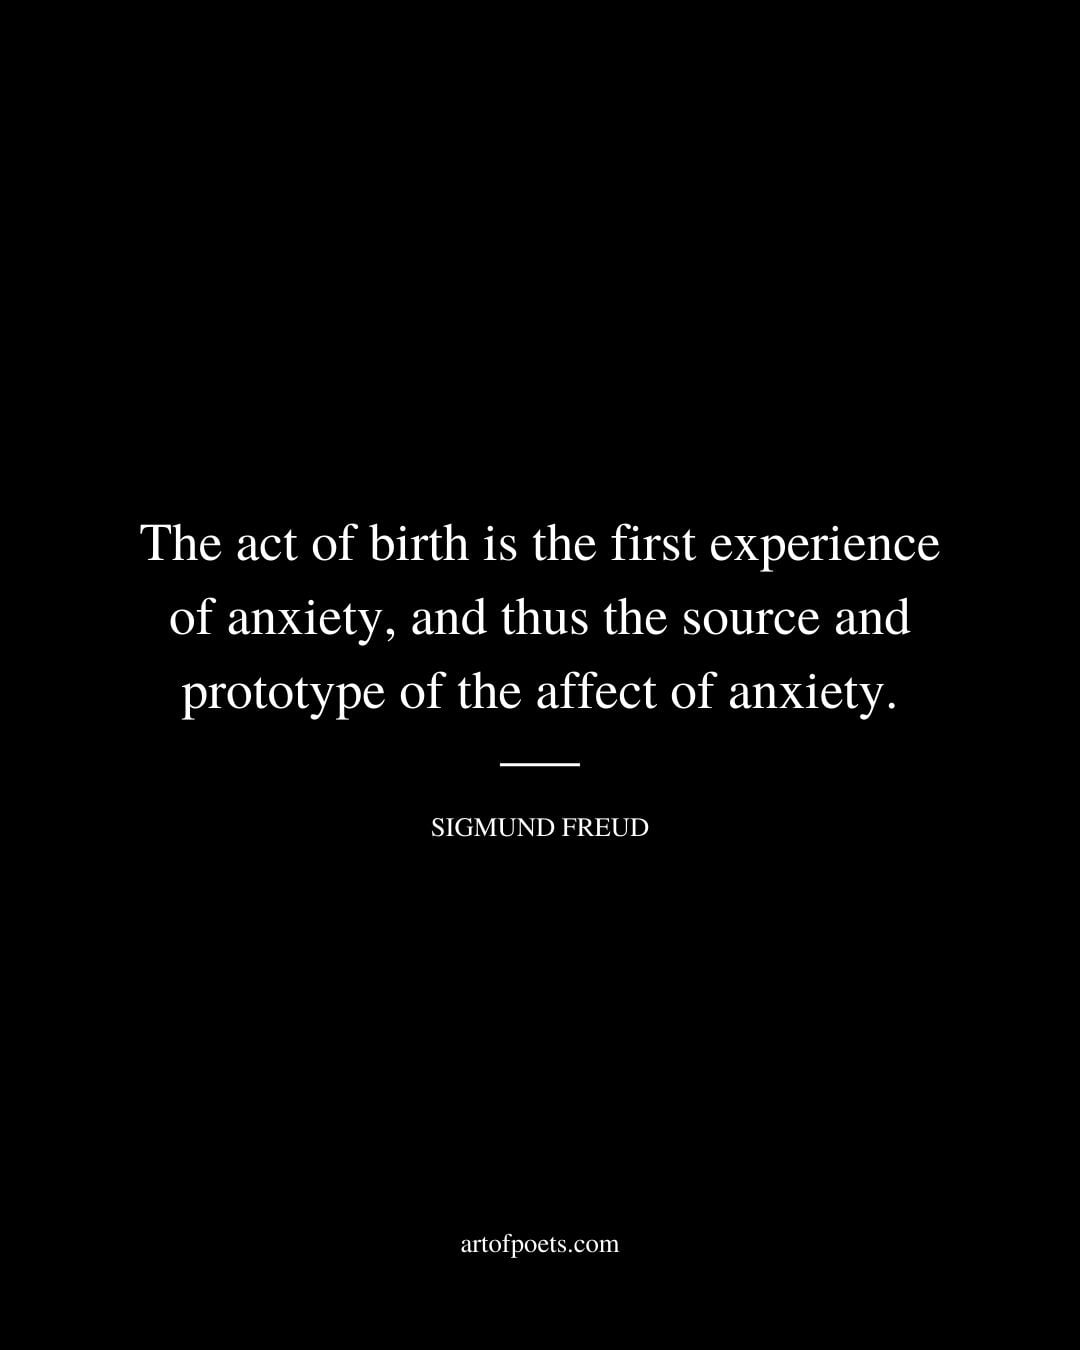 The act of birth is the first experience of anxiety and thus the source and prototype of the affect of